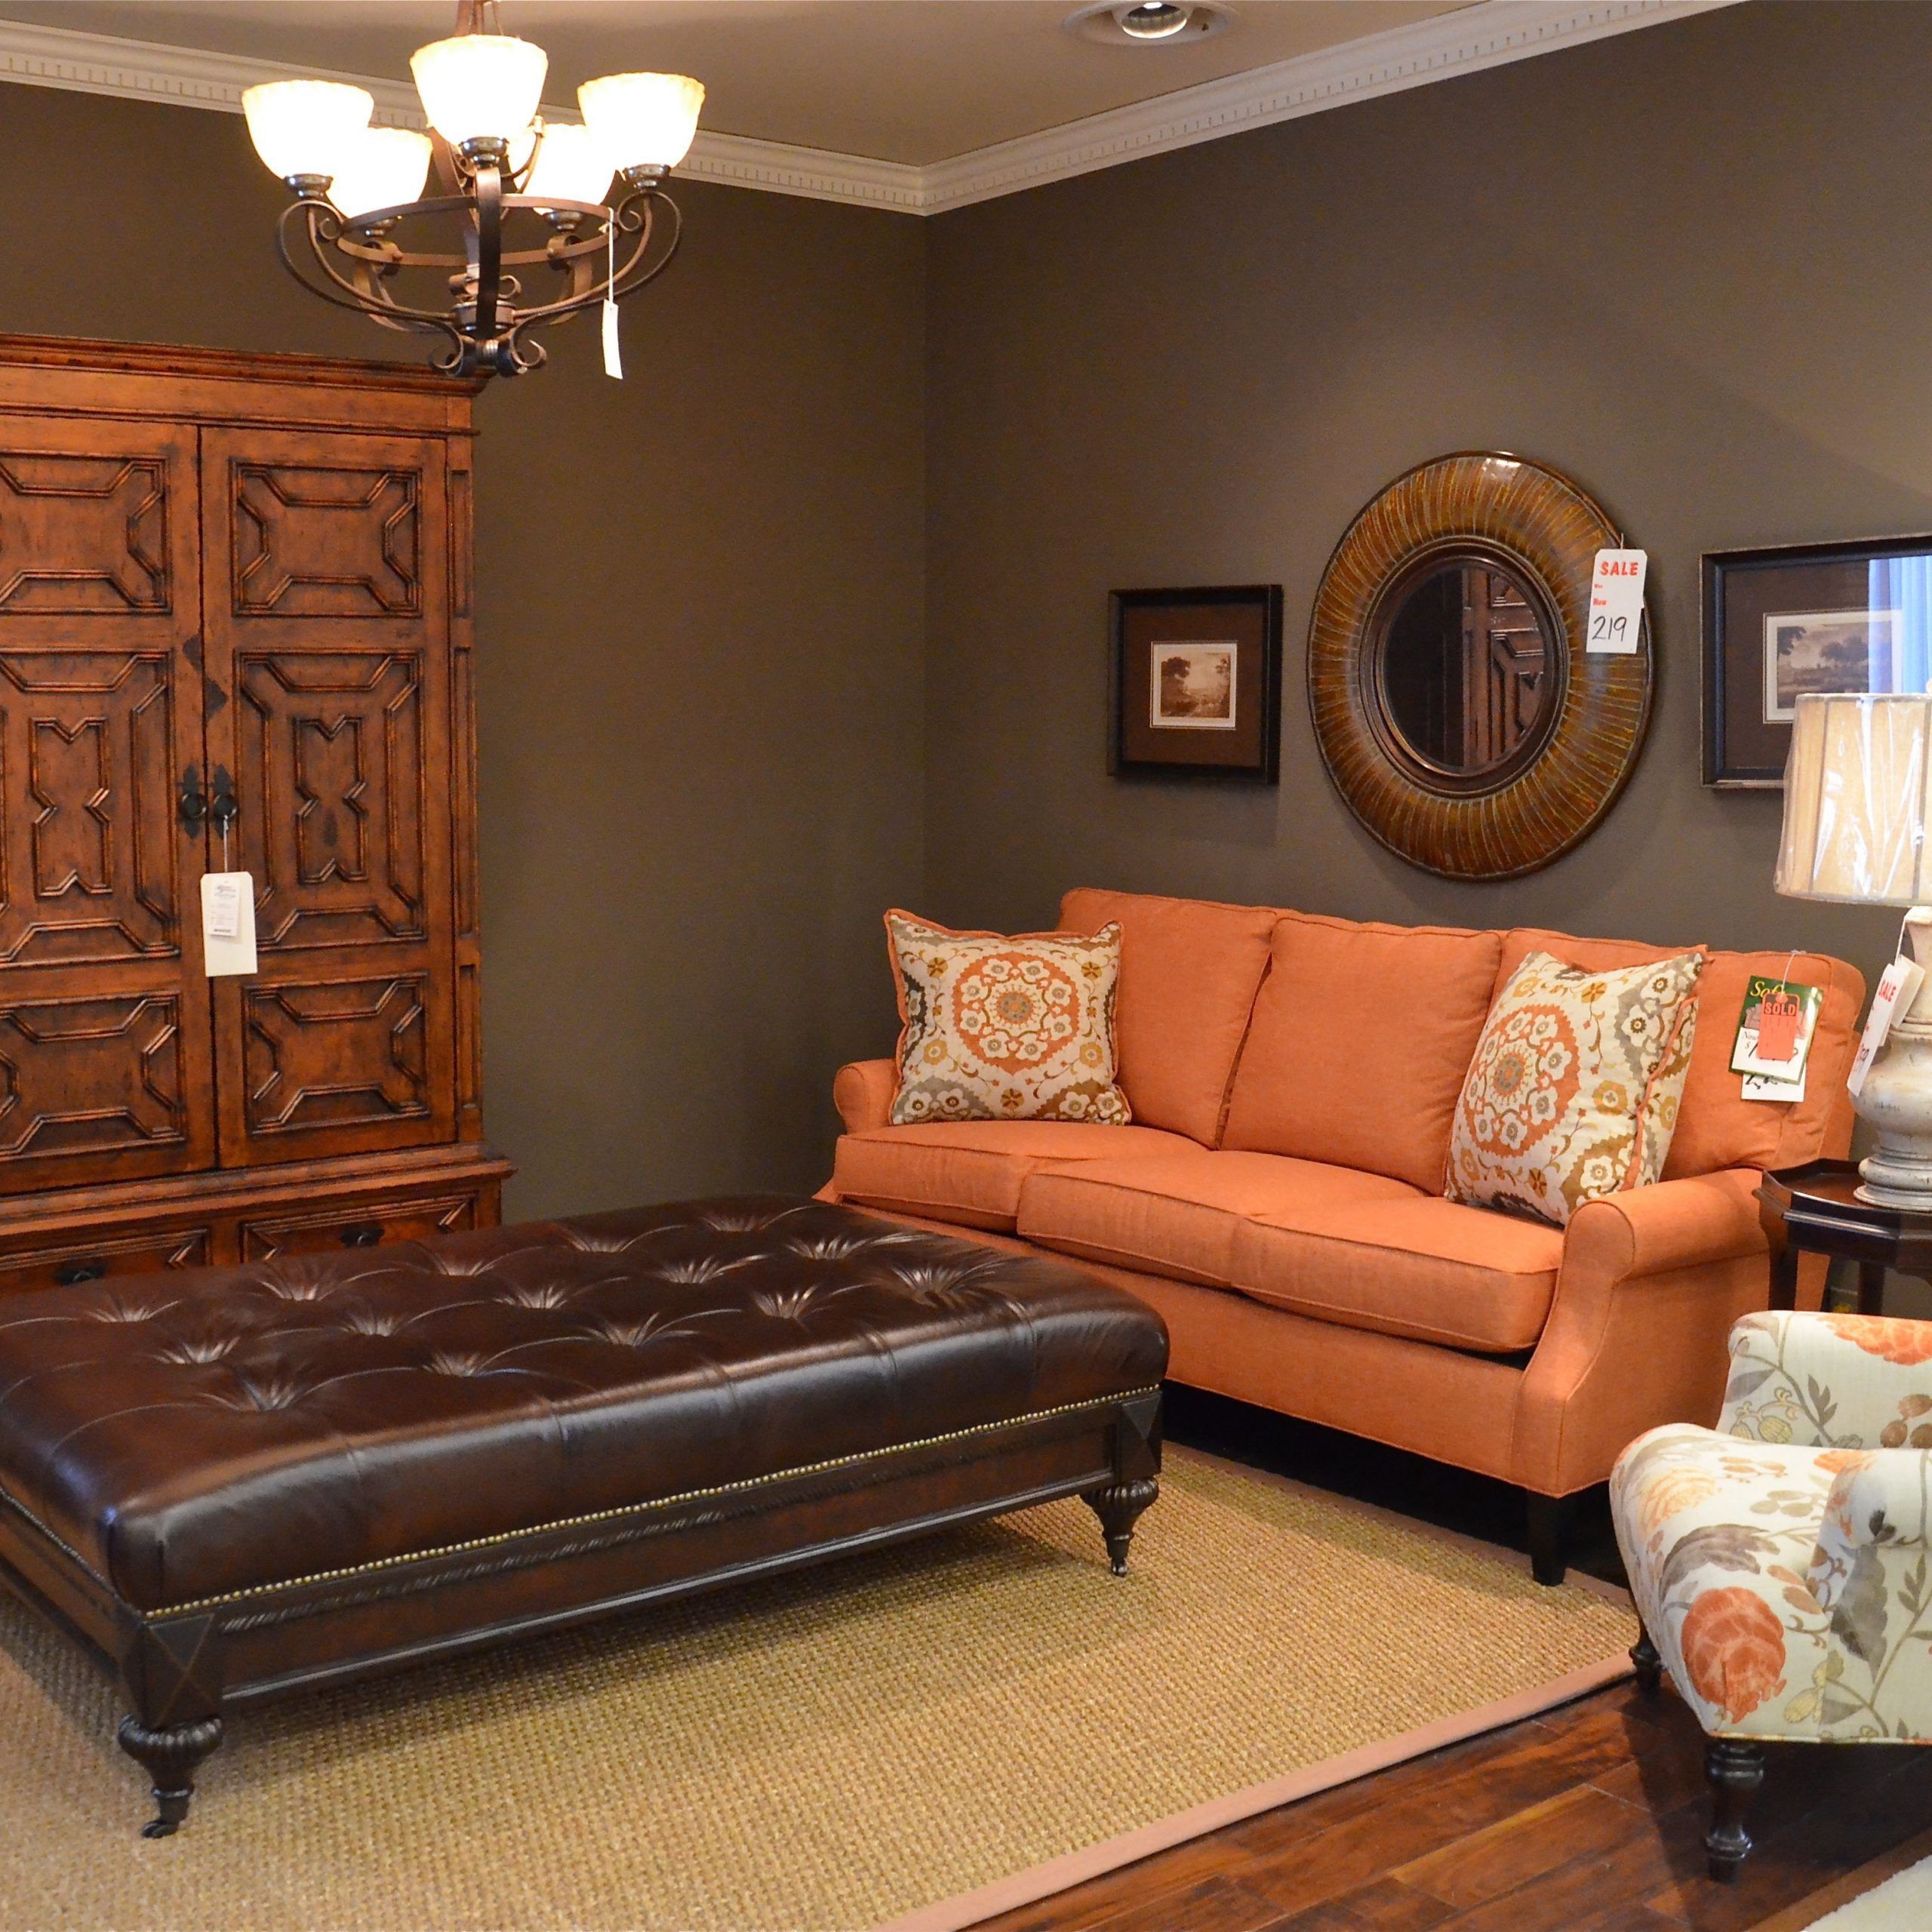 Leather Ottoman Gives An Eclectic Feel To A Formal Space With Oriental Within Tuxedo Ottomans (View 6 of 20)